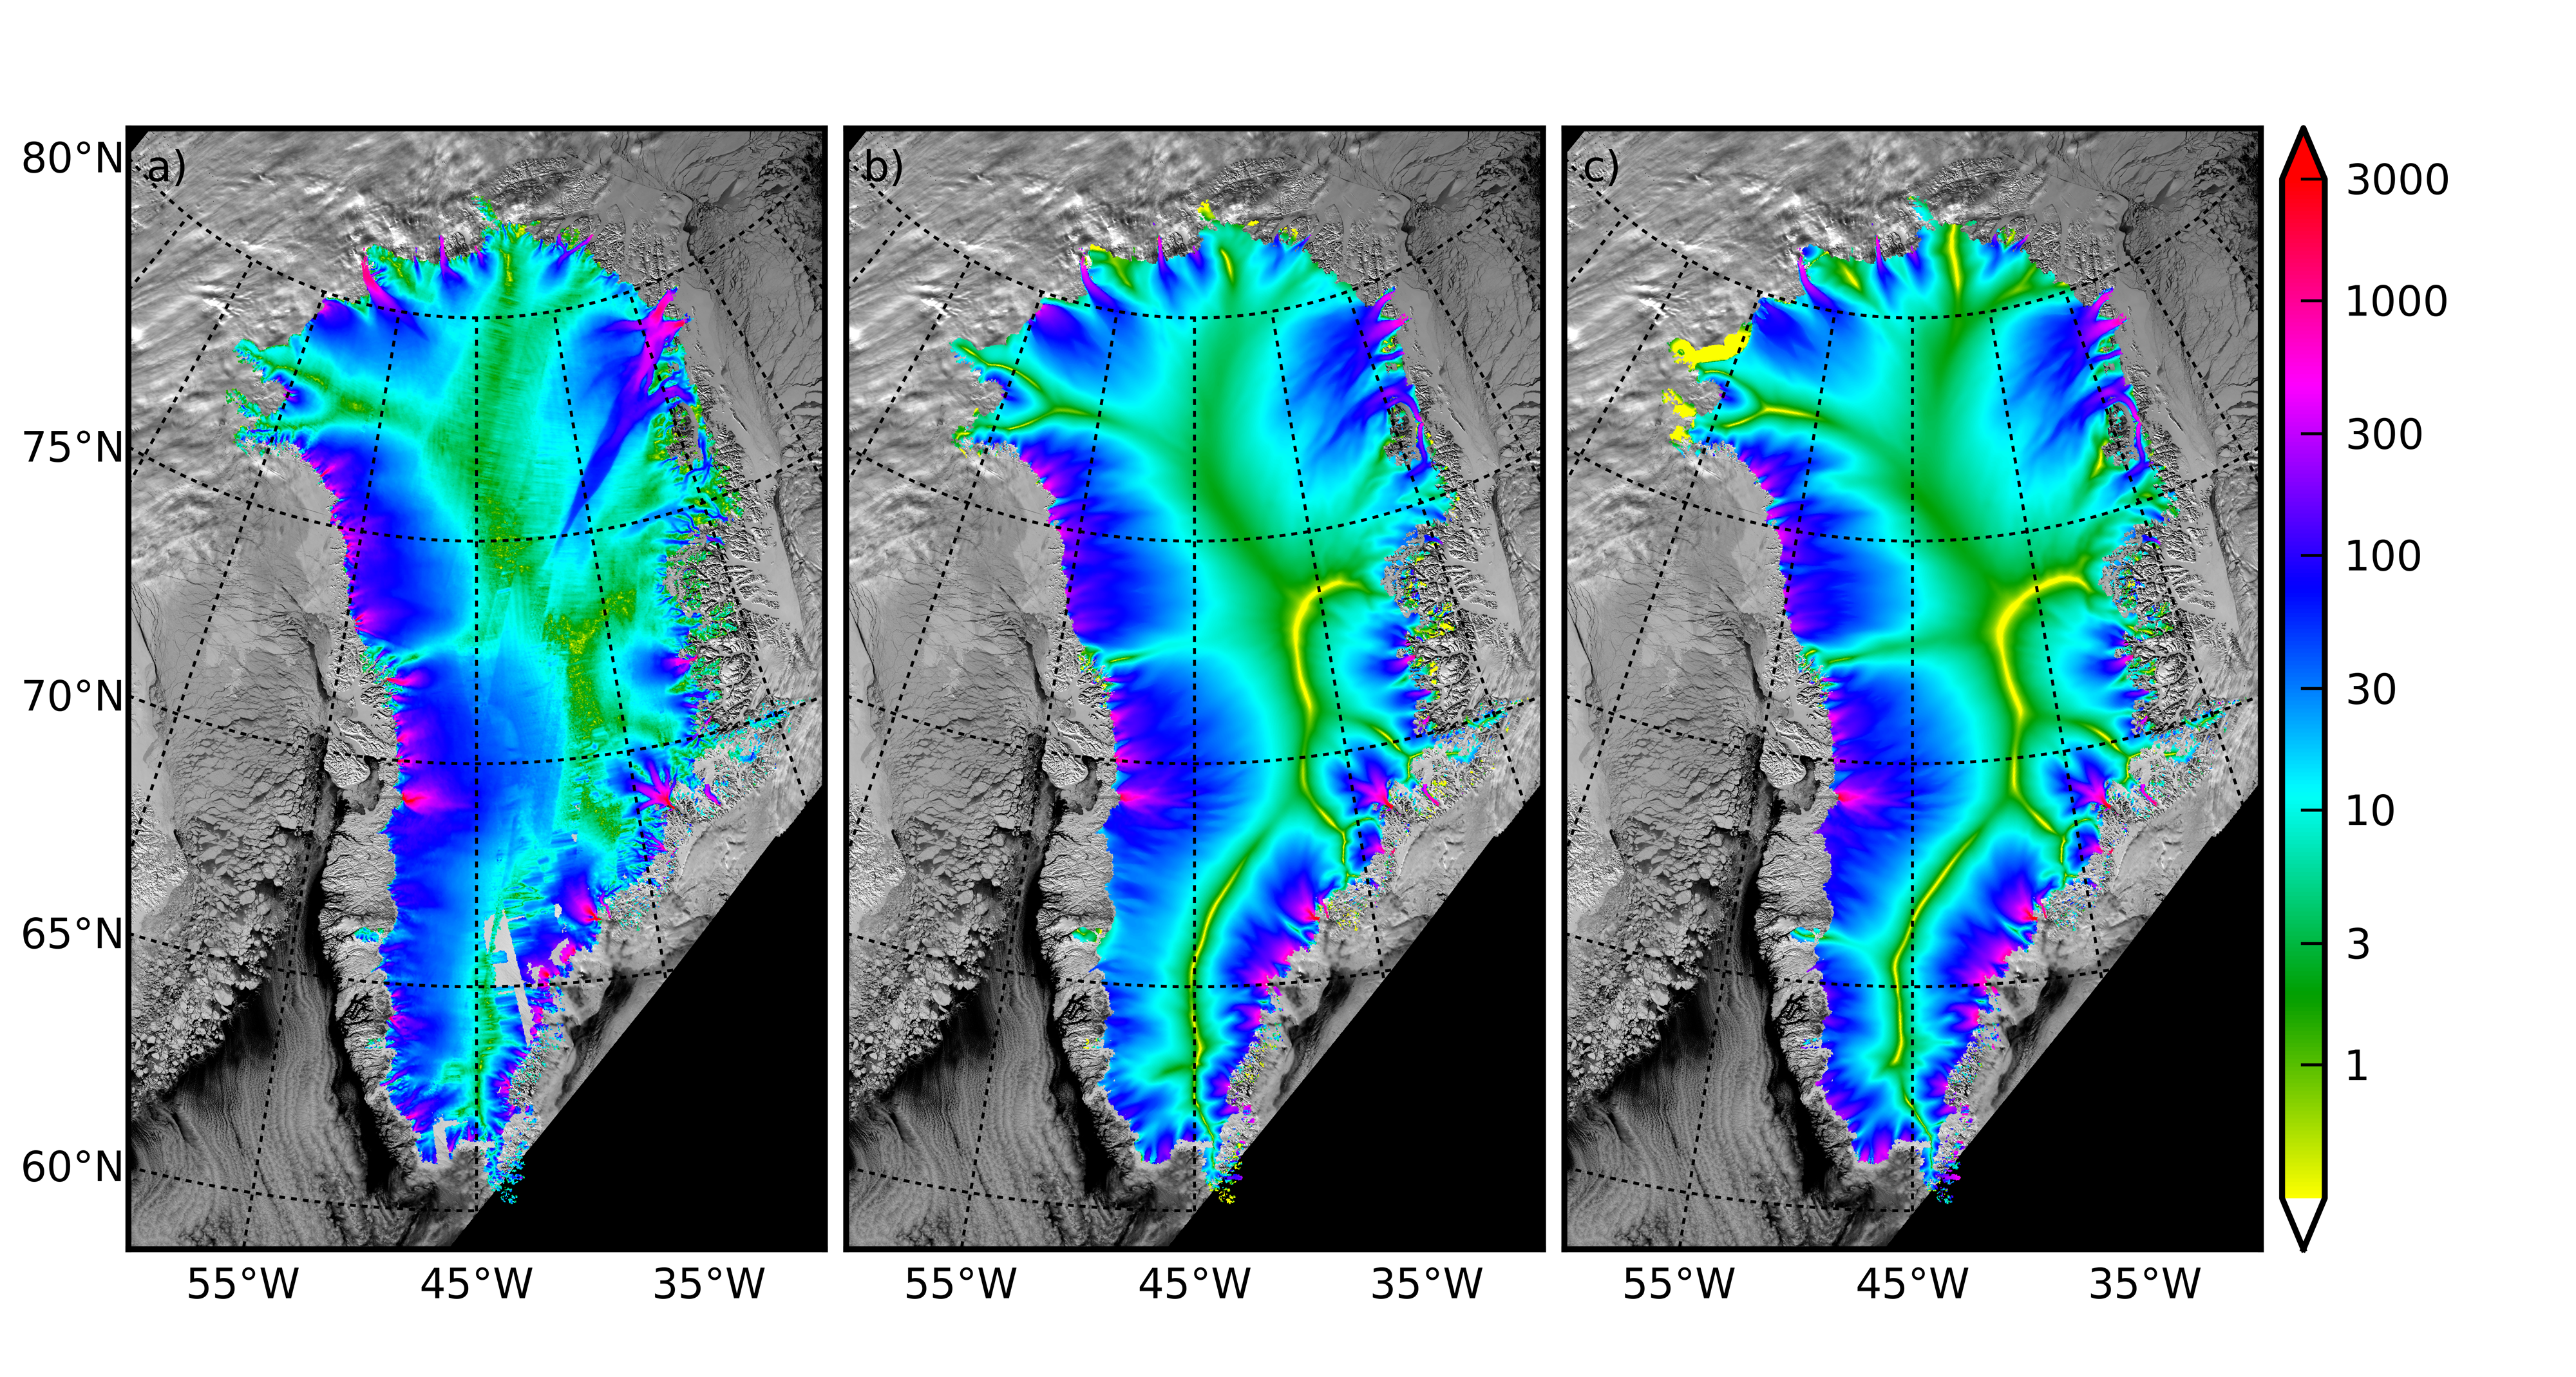 Parallel netCDF4 allows first Greenland simulation on a 1km grid